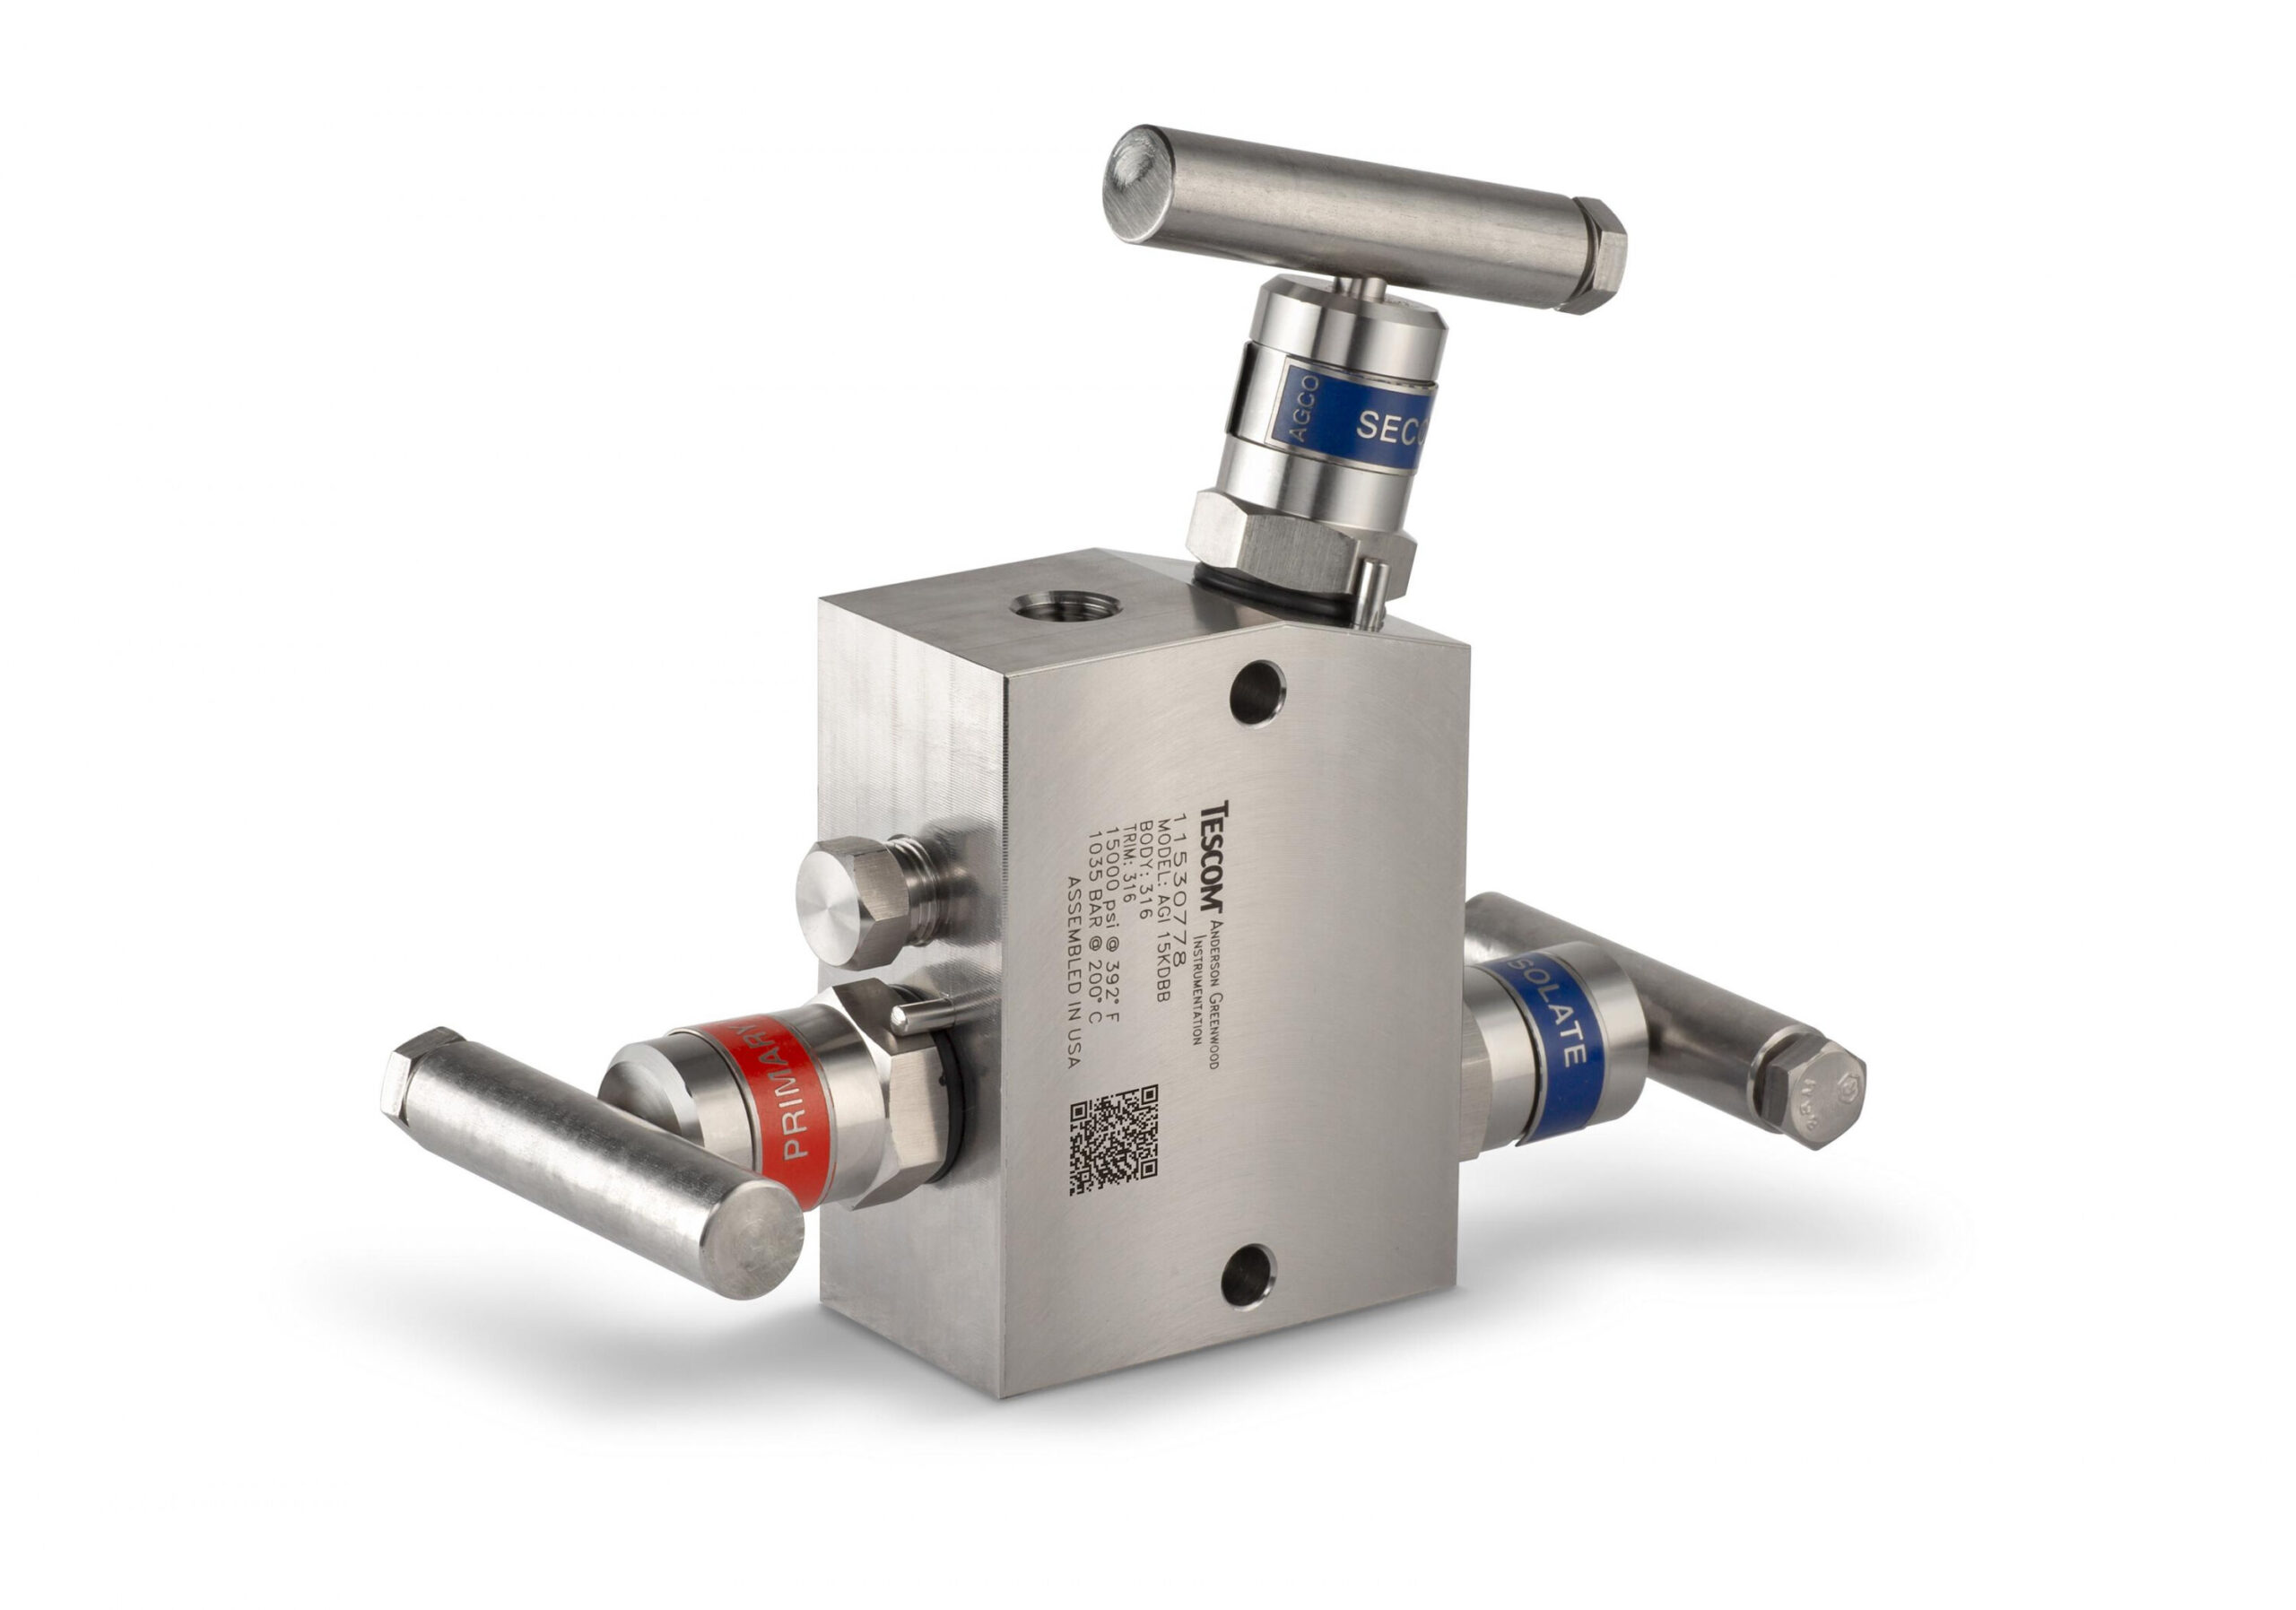 Emerson’s new valves for hydrogen fuelling stations ensure maintenance safety, minimises leaks